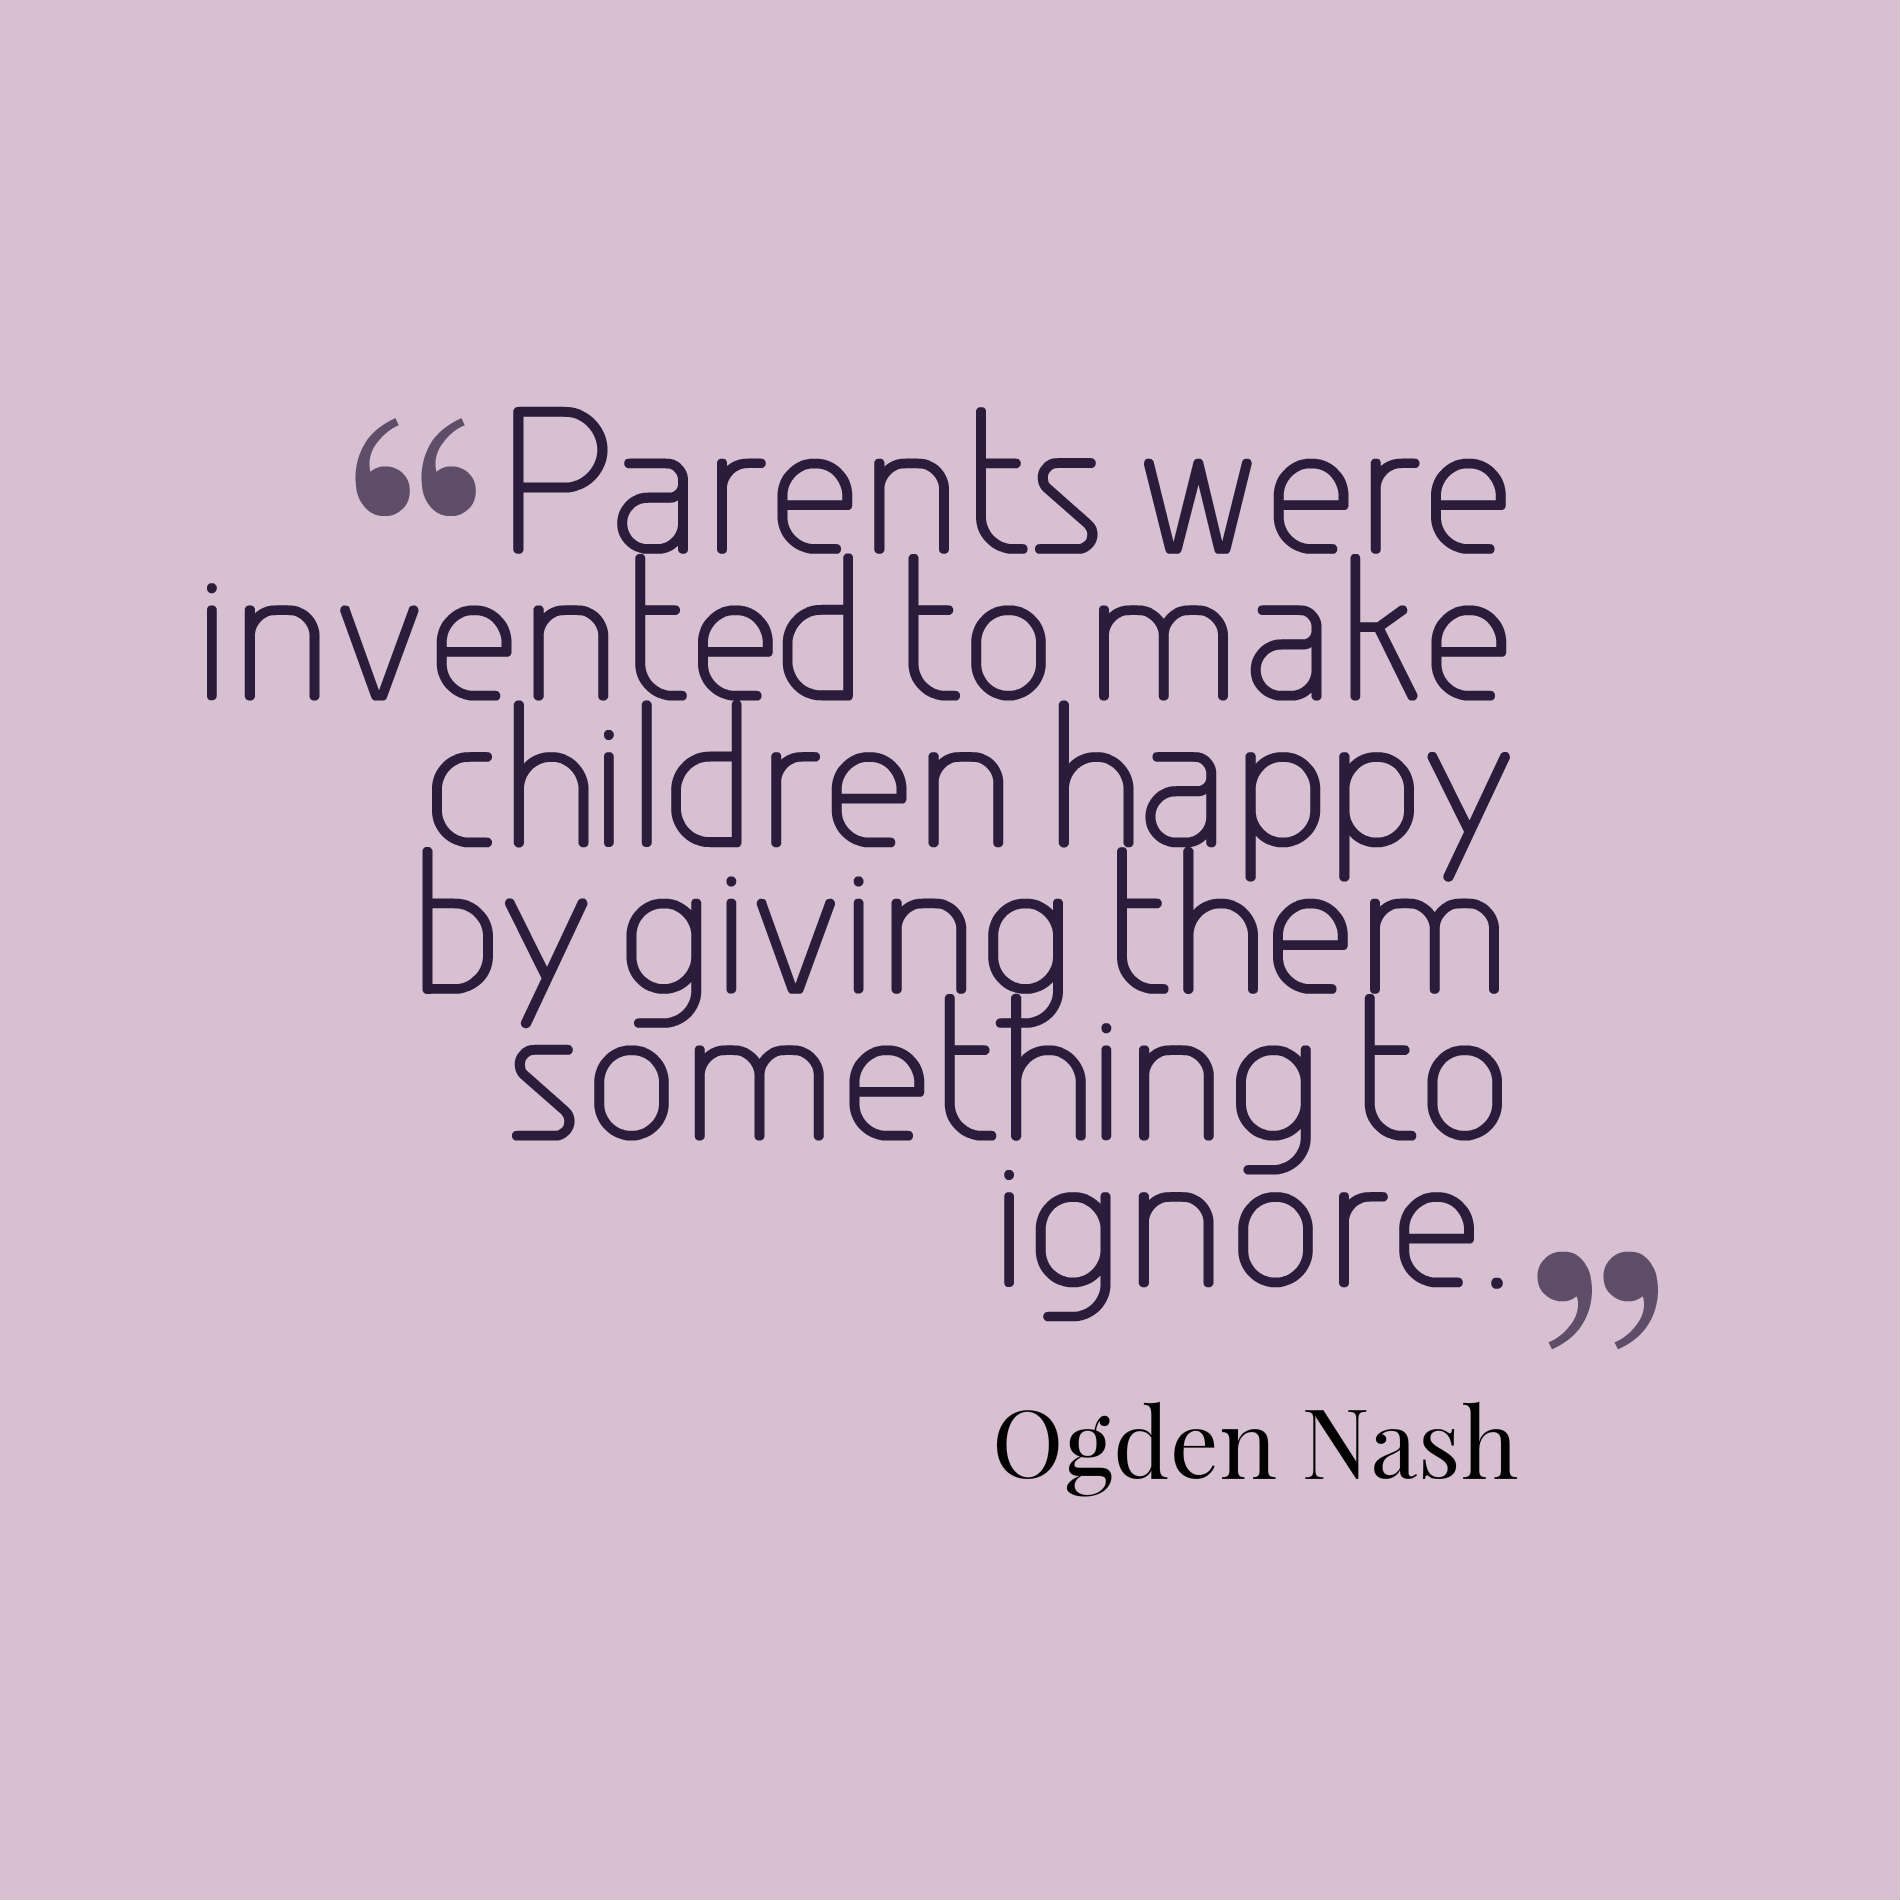 Parents were invented to make children happy by giving them something to ignore.